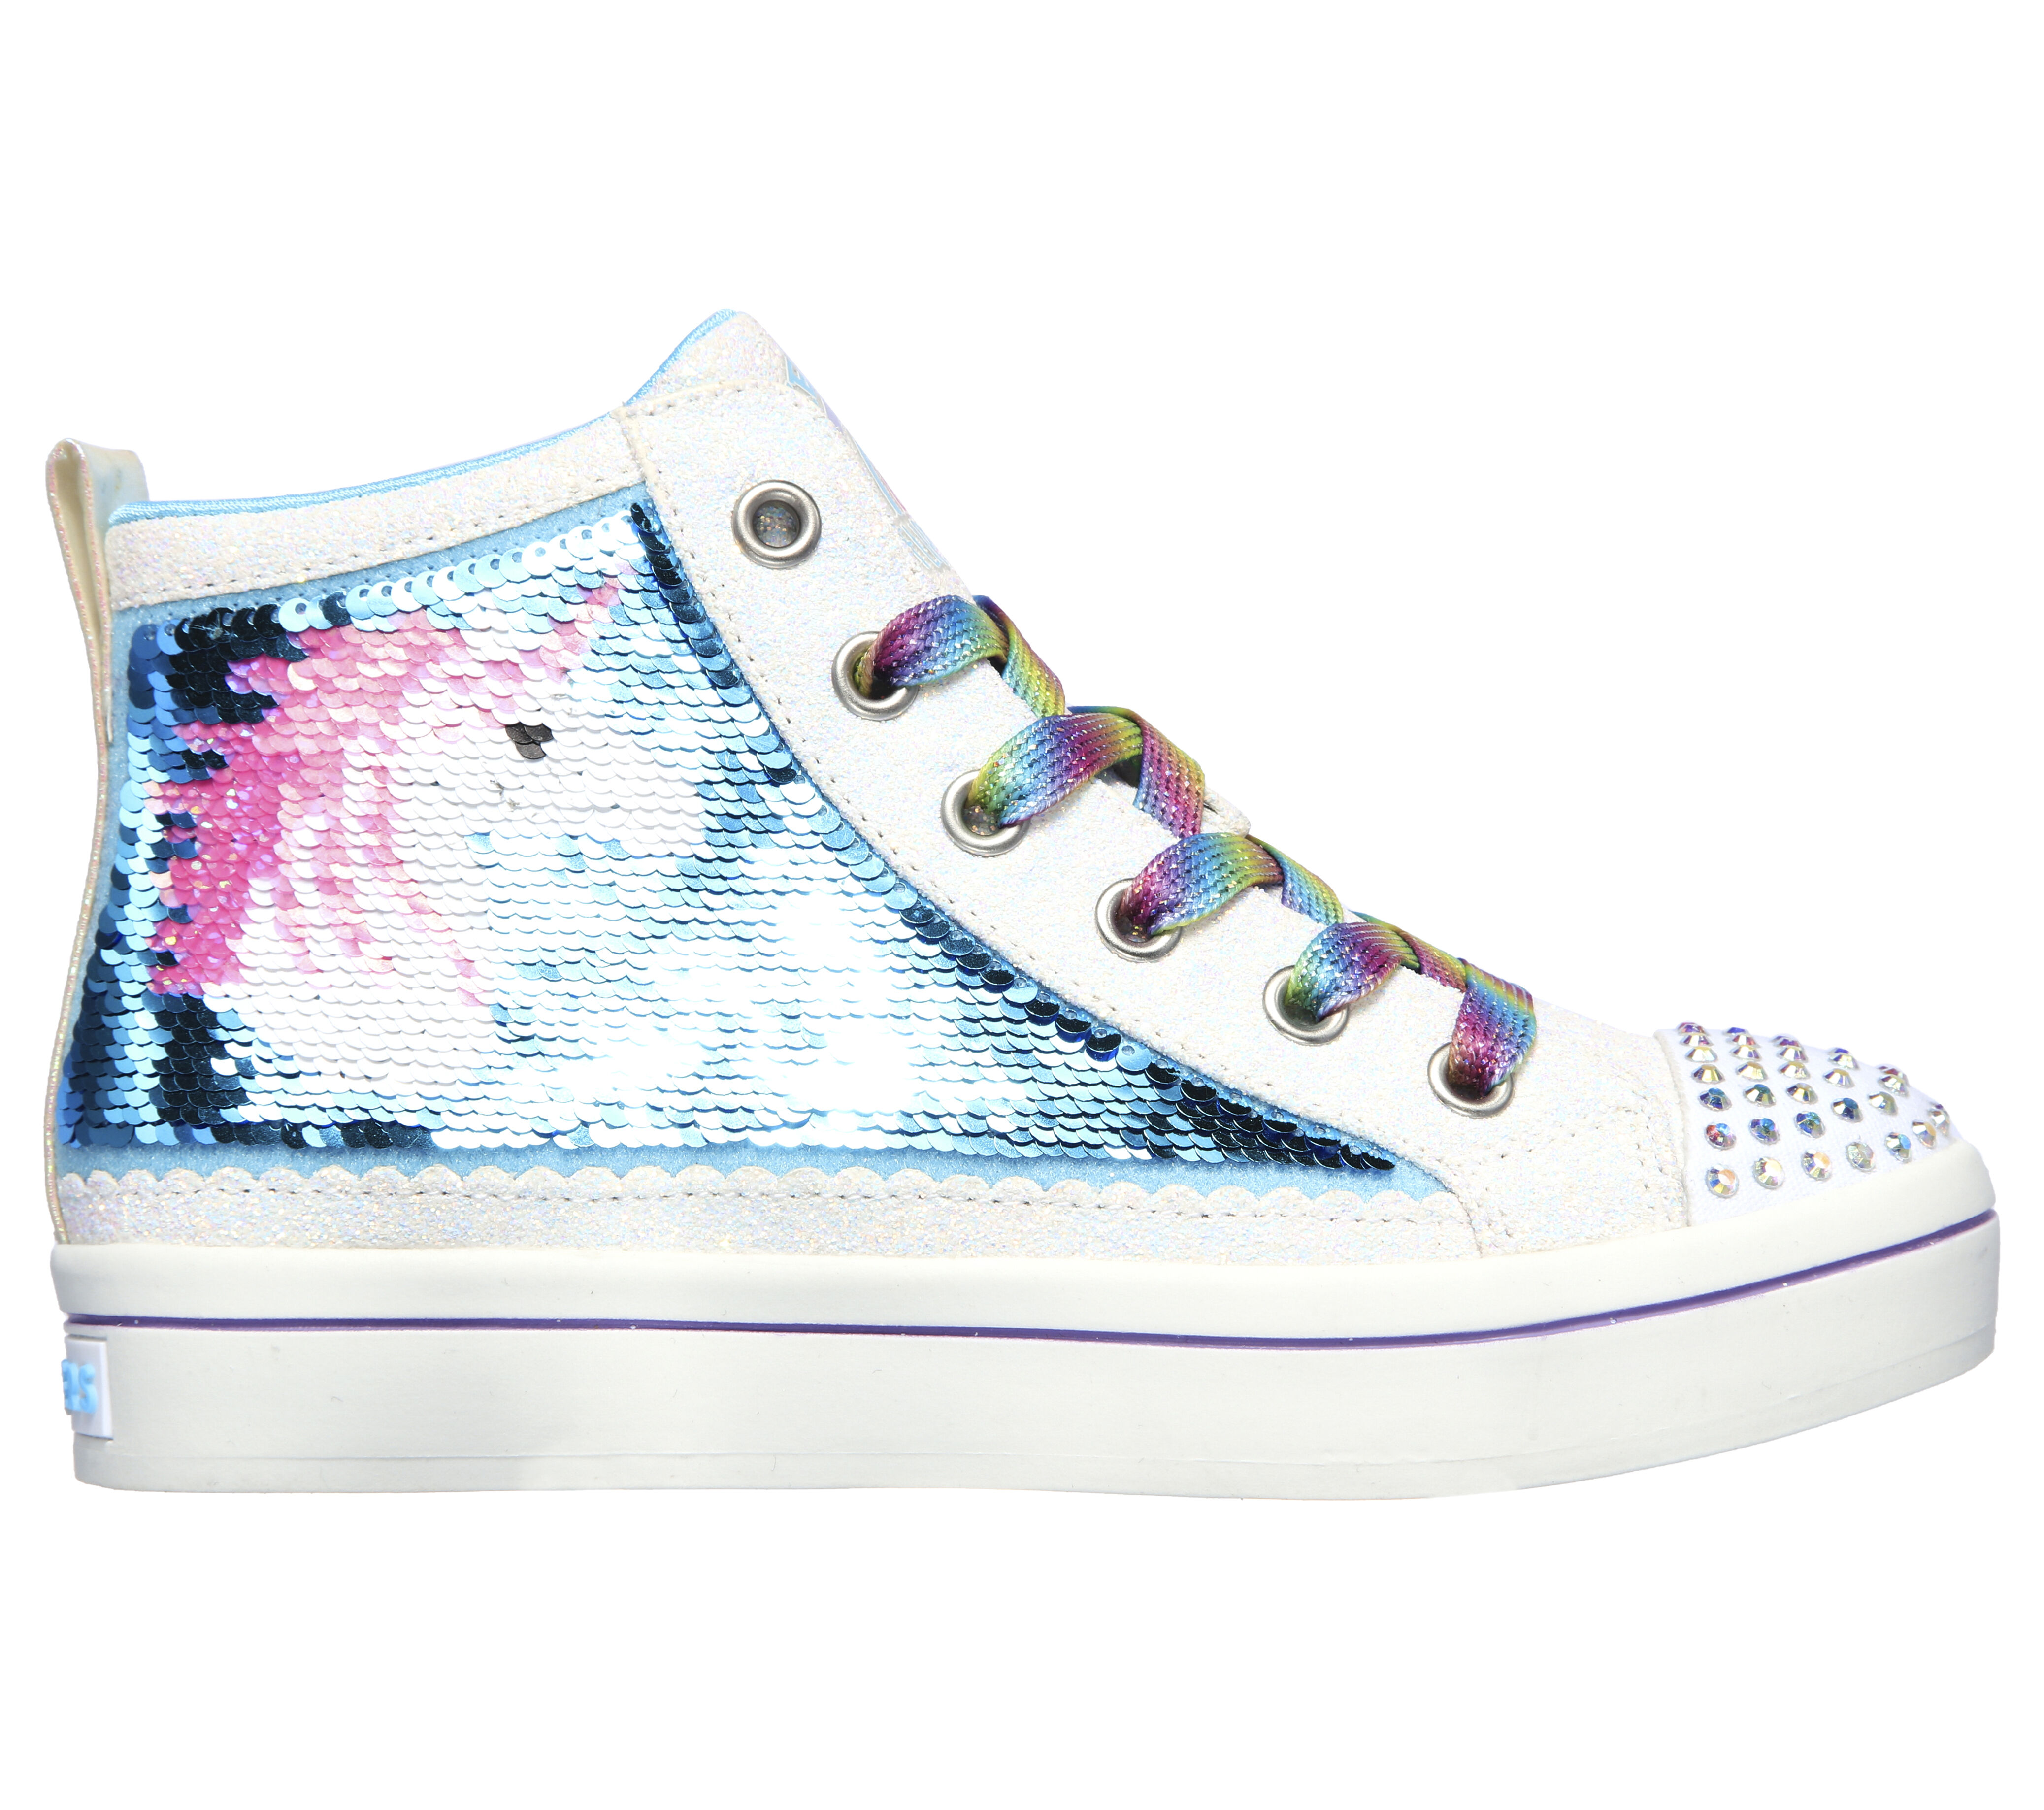 Shop the Twinkle Toes: Twi-Lites 2.0 